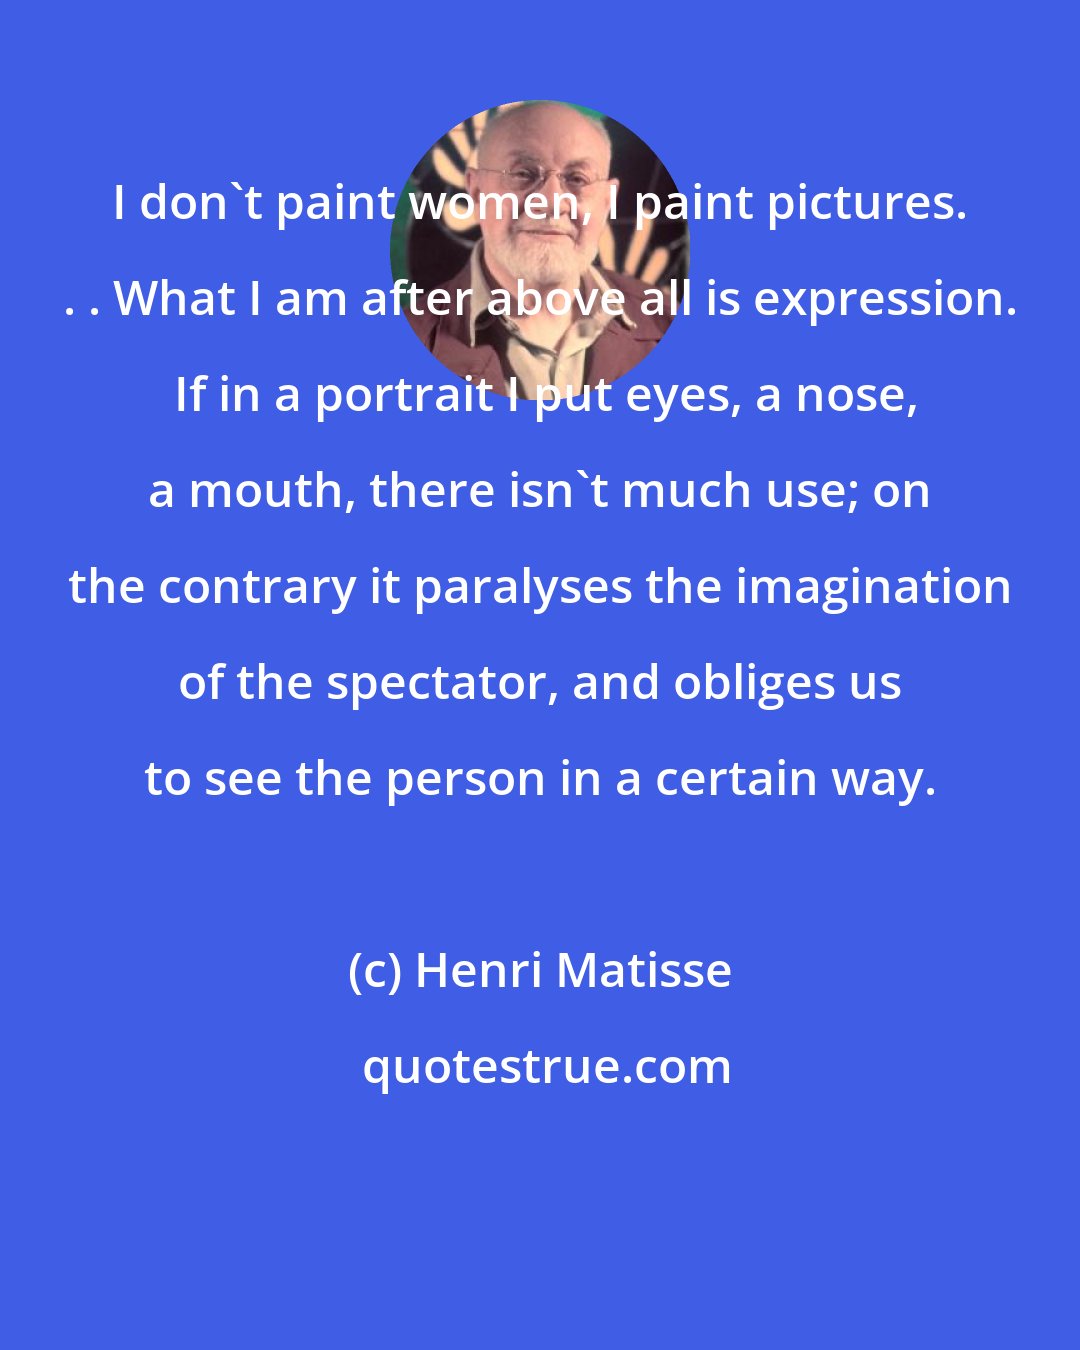 Henri Matisse: I don't paint women, I paint pictures. . . What I am after above all is expression.  If in a portrait I put eyes, a nose, a mouth, there isn't much use; on the contrary it paralyses the imagination of the spectator, and obliges us to see the person in a certain way.